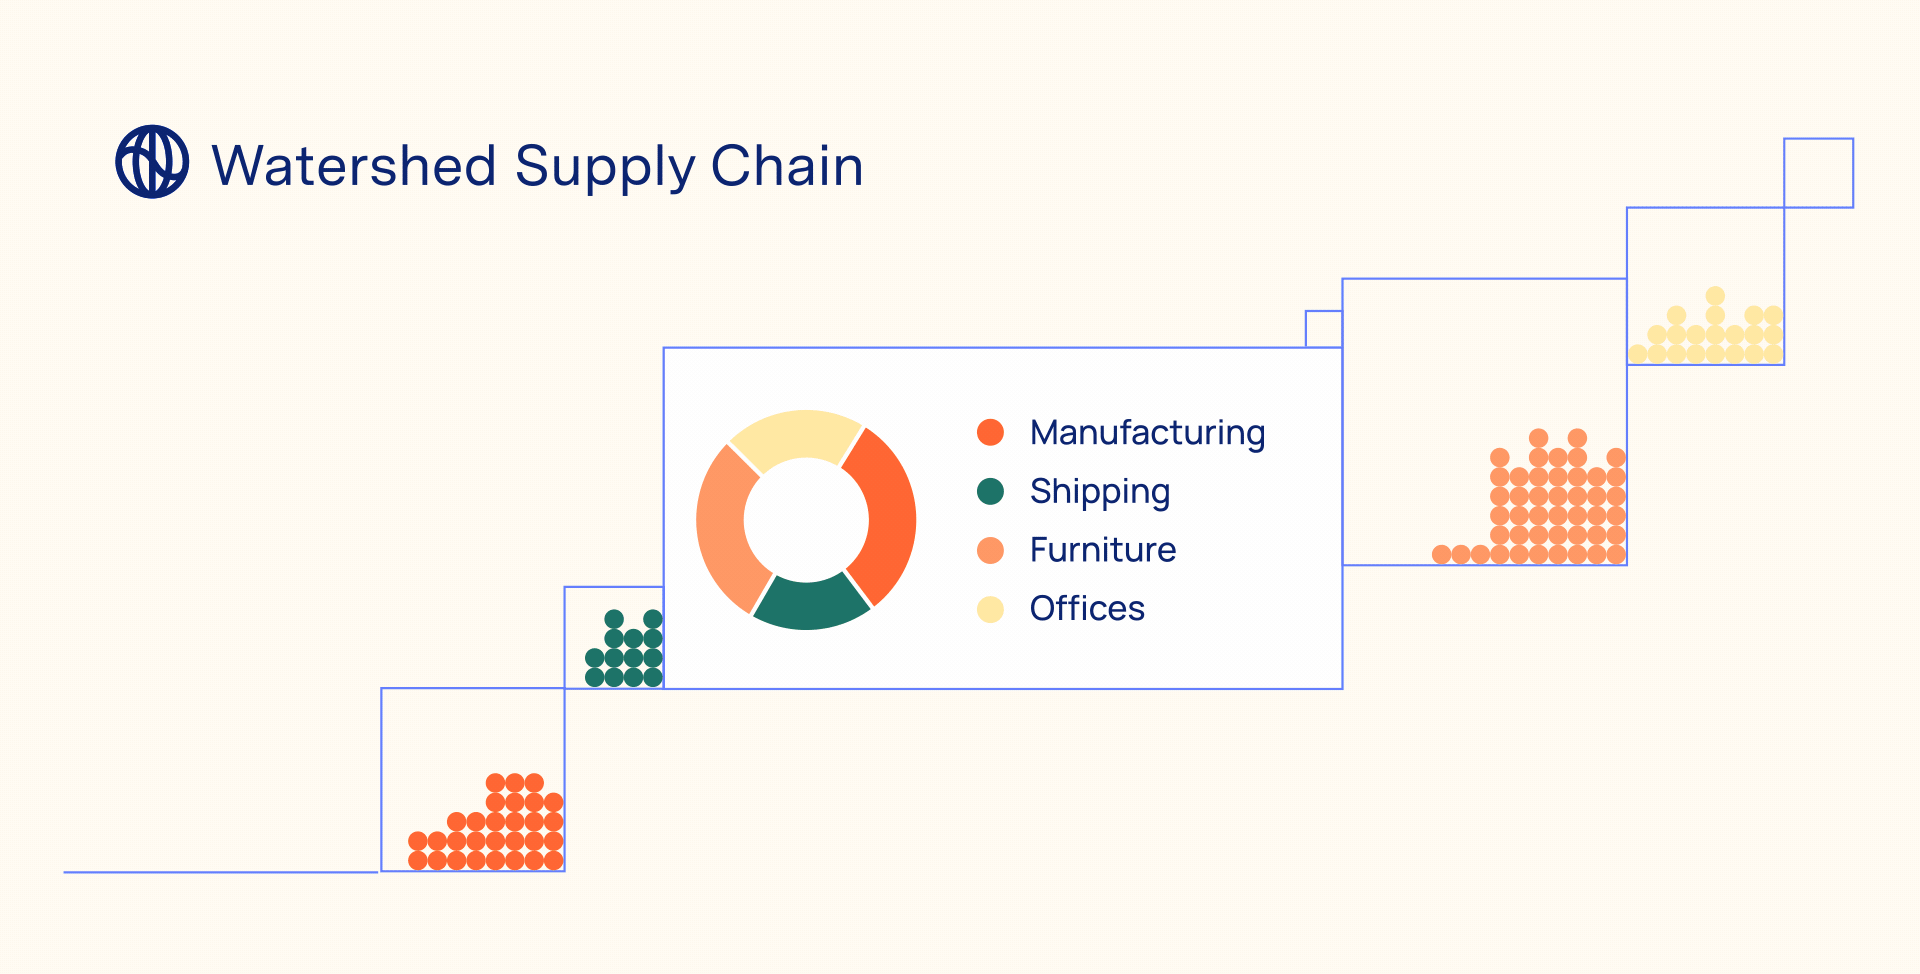 Watershed supply chain - animation of organization of scope 3 elements